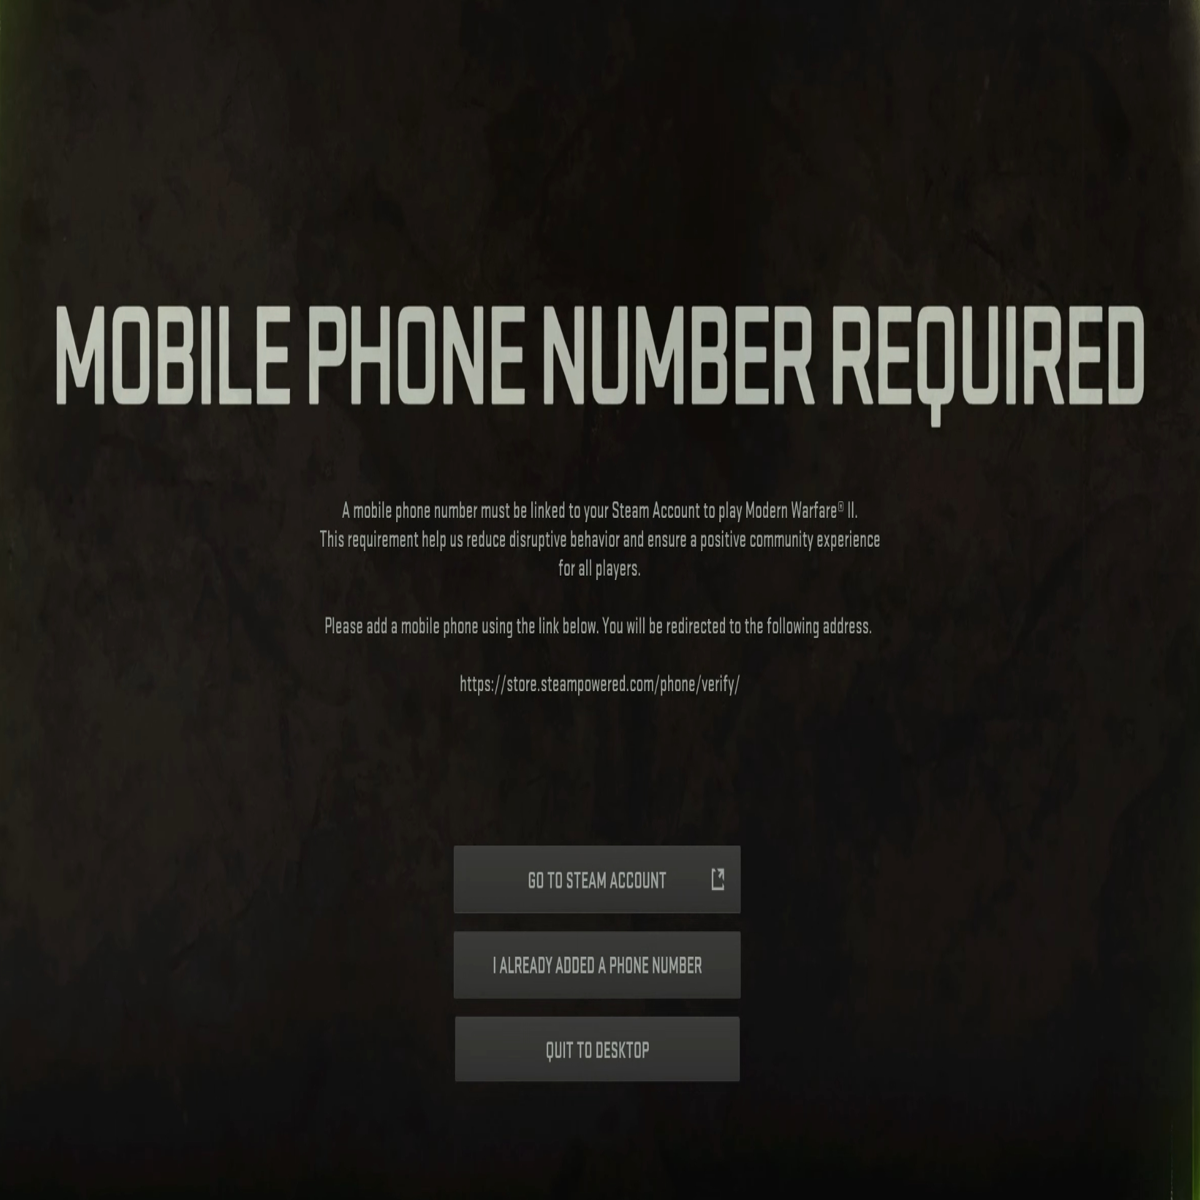 Upcoming Call of Duty has annoying phone number verification requirement -  The Verge